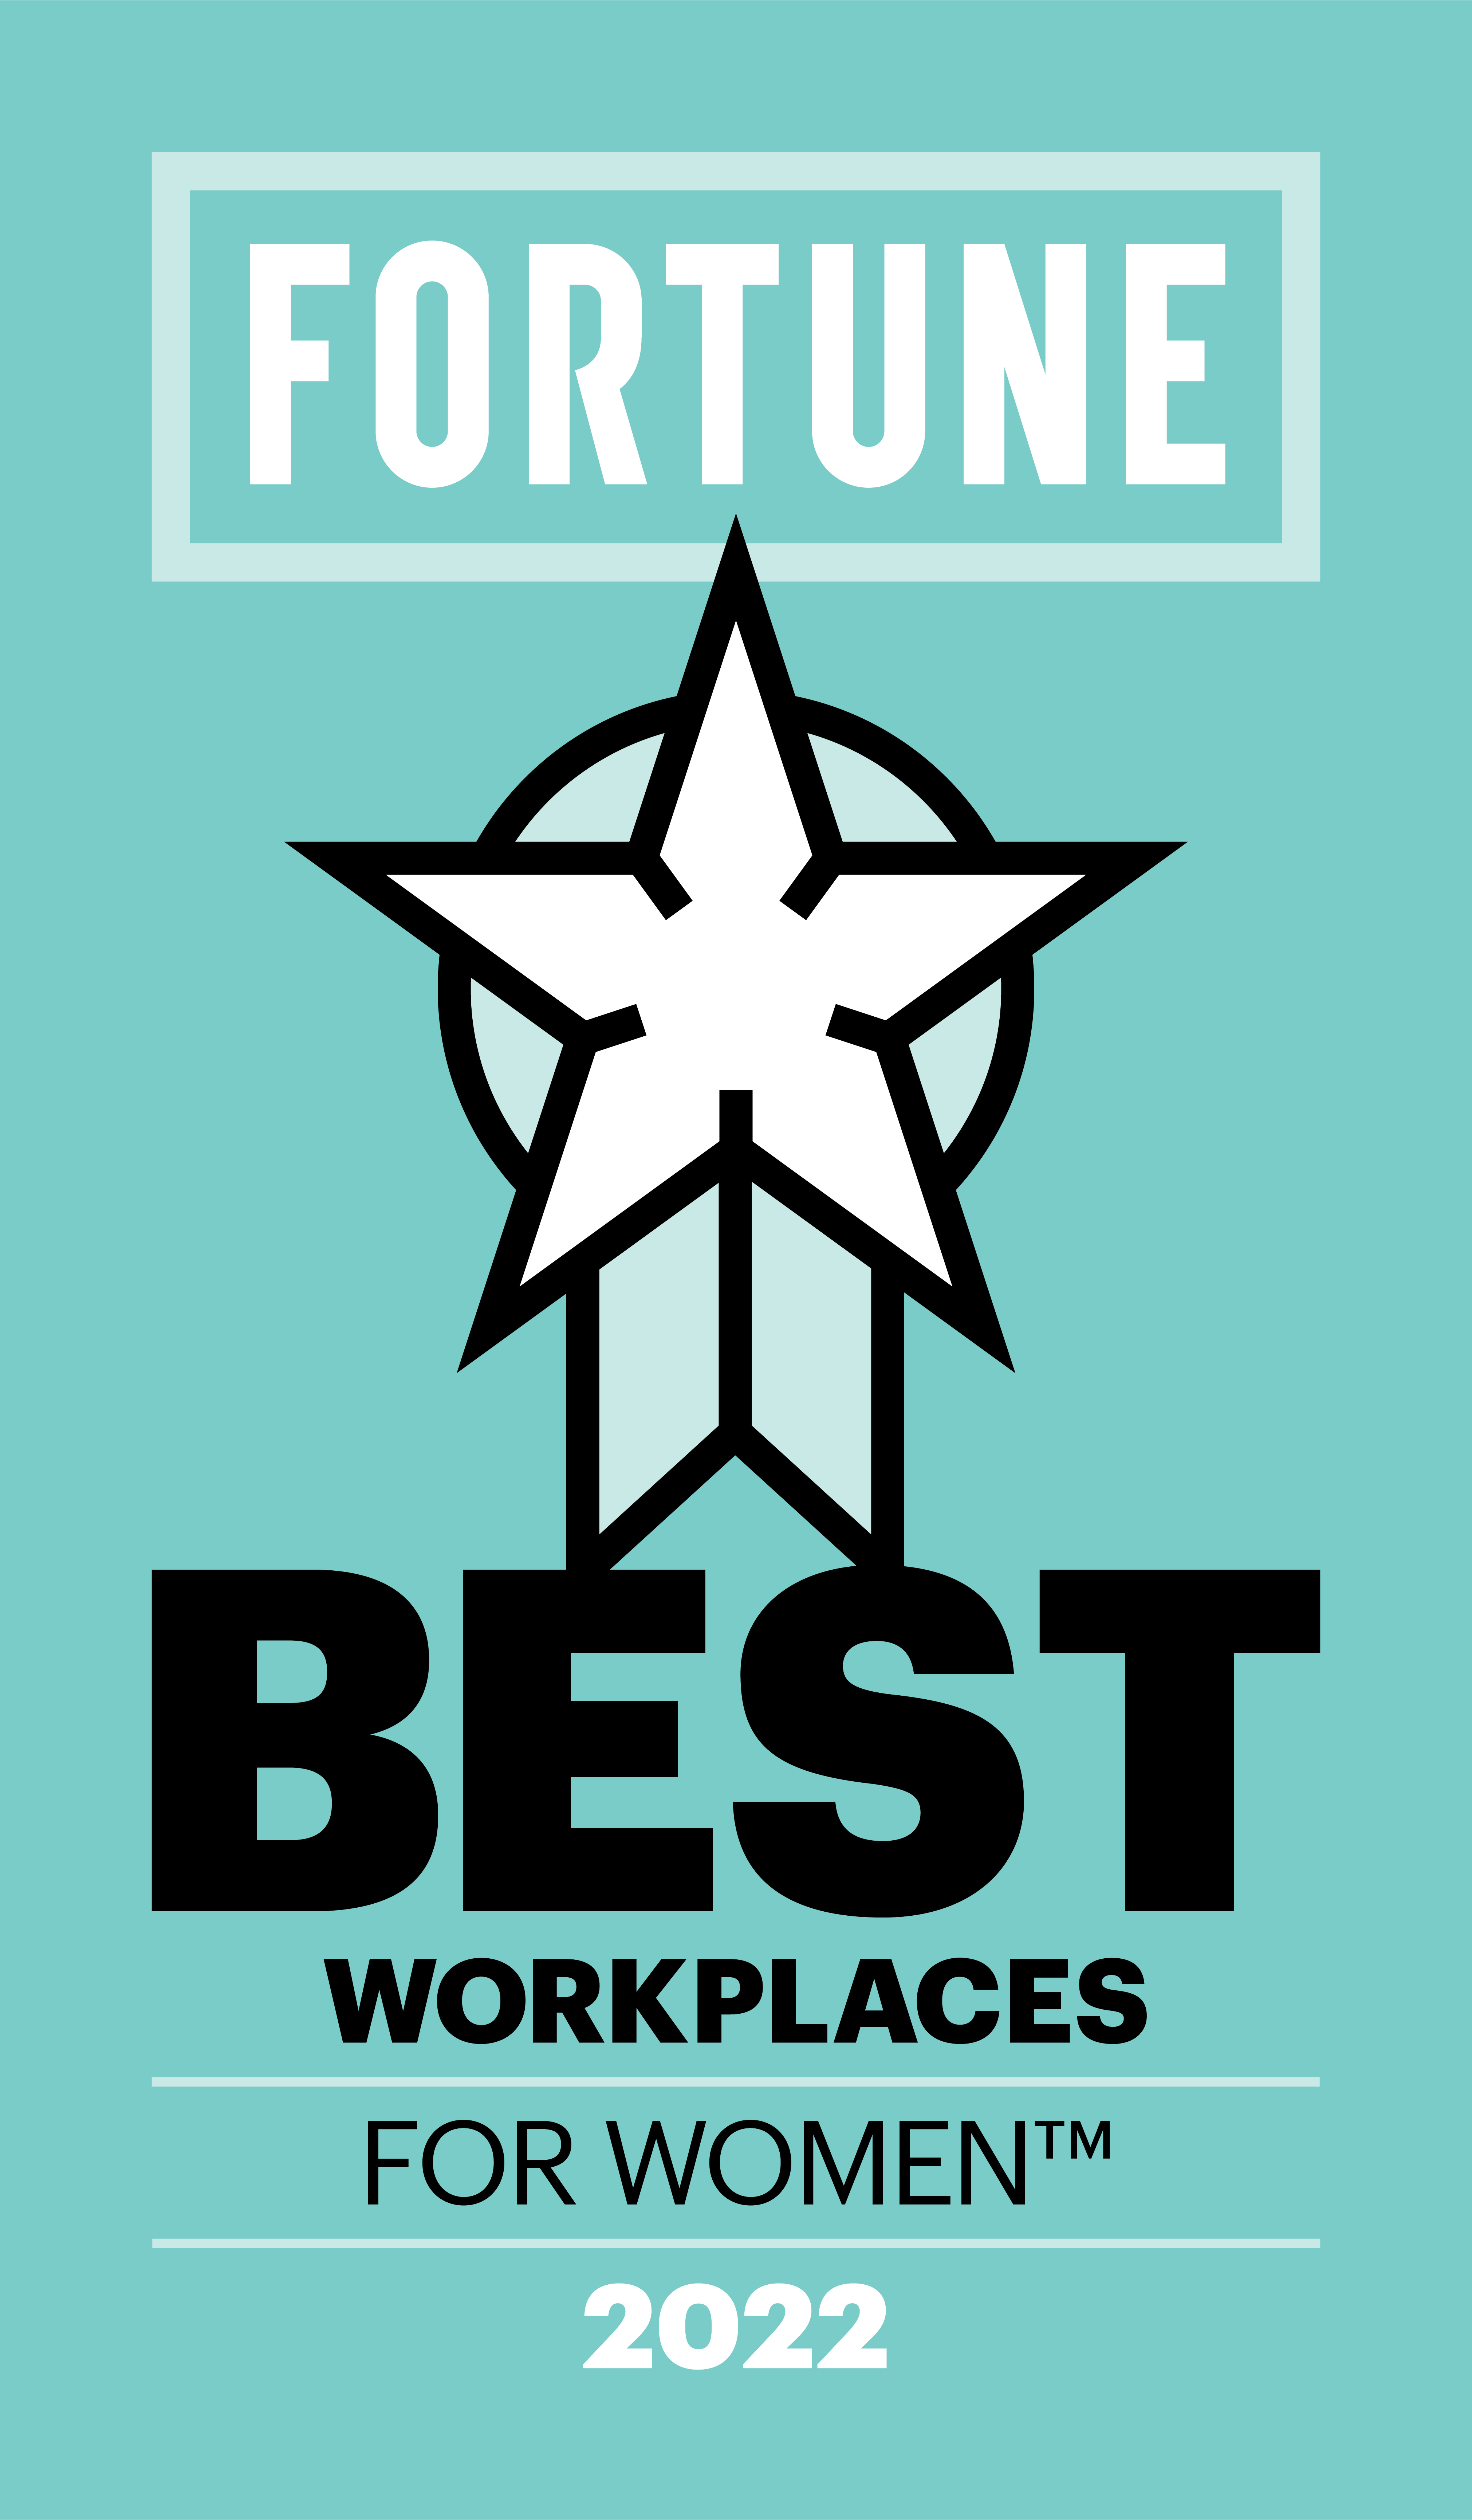 Fortune Best Workplaces for Women